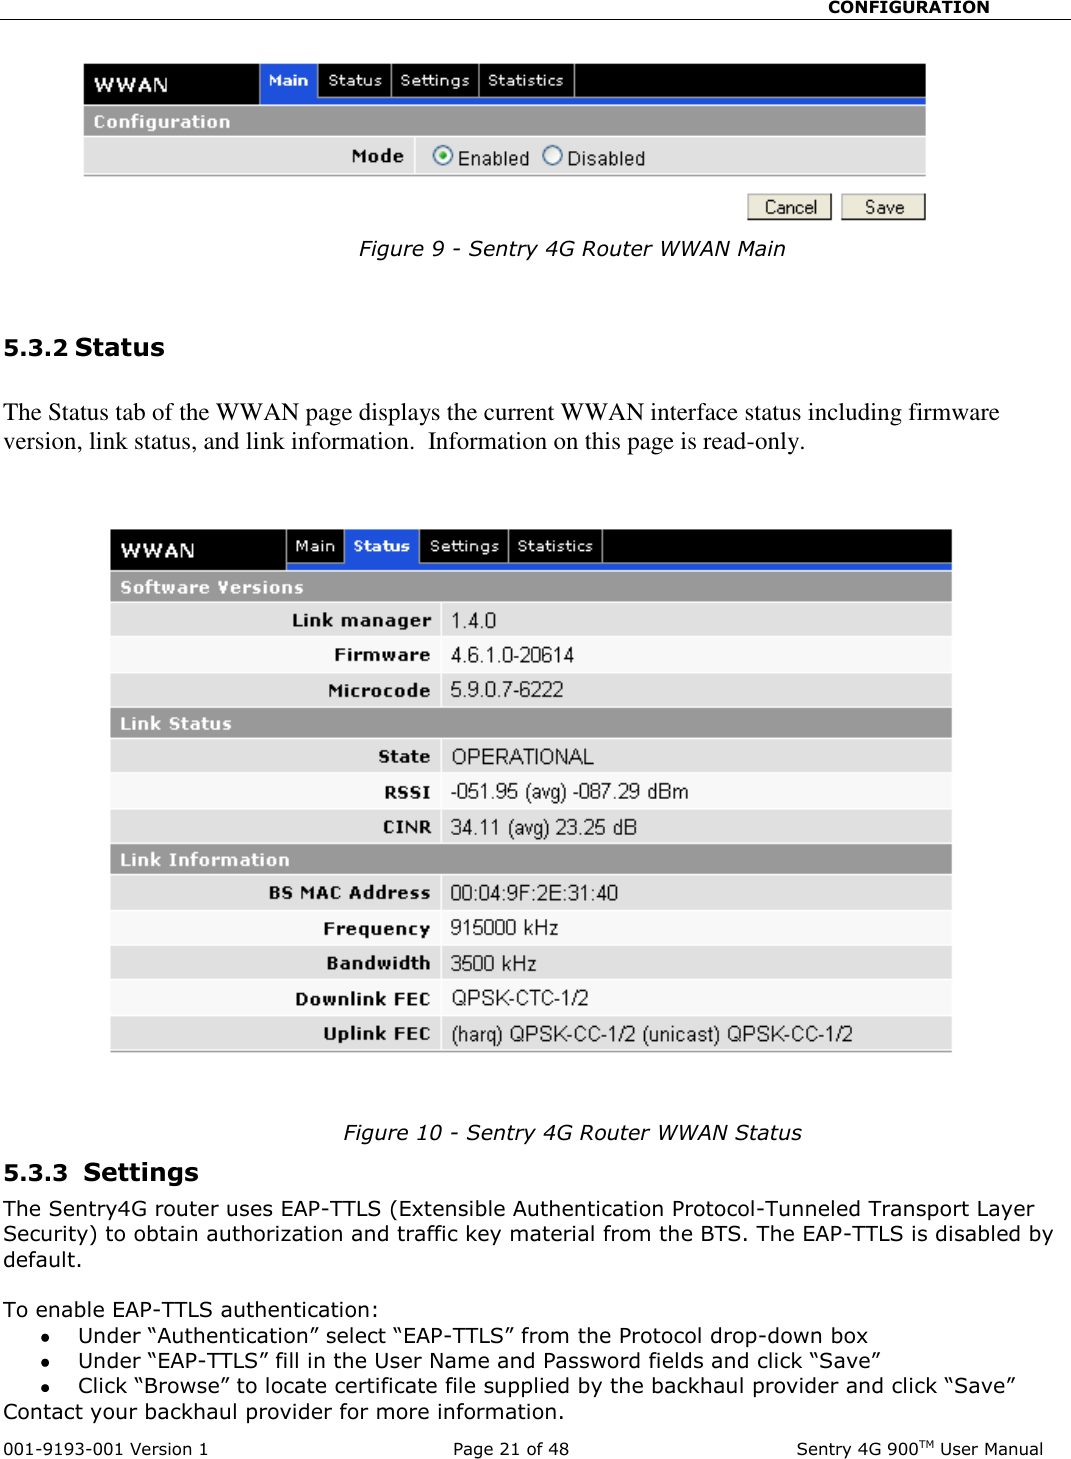                                                       CONFIGURATION  001-9193-001 Version 1              Page 21 of 48               Sentry 4G 900TM User Manual Figure 9 - Sentry 4G Router WWAN Main   5.3.2 Status  The Status tab of the WWAN page displays the current WWAN interface status including firmware version, link status, and link information.  Information on this page is read-only.      Figure 10 - Sentry 4G Router WWAN Status 5.3.3  Settings  The Sentry4G router uses EAP-TTLS (Extensible Authentication Protocol-Tunneled Transport Layer Security) to obtain authorization and traffic key material from the BTS. The EAP-TTLS is disabled by default.   To enable EAP-TTLS authentication:  Under “Authentication” select “EAP-TTLS” from the Protocol drop-down box   Under “EAP-TTLS” fill in the User Name and Password fields and click “Save”  Click “Browse” to locate certificate file supplied by the backhaul provider and click “Save” Contact your backhaul provider for more information.  